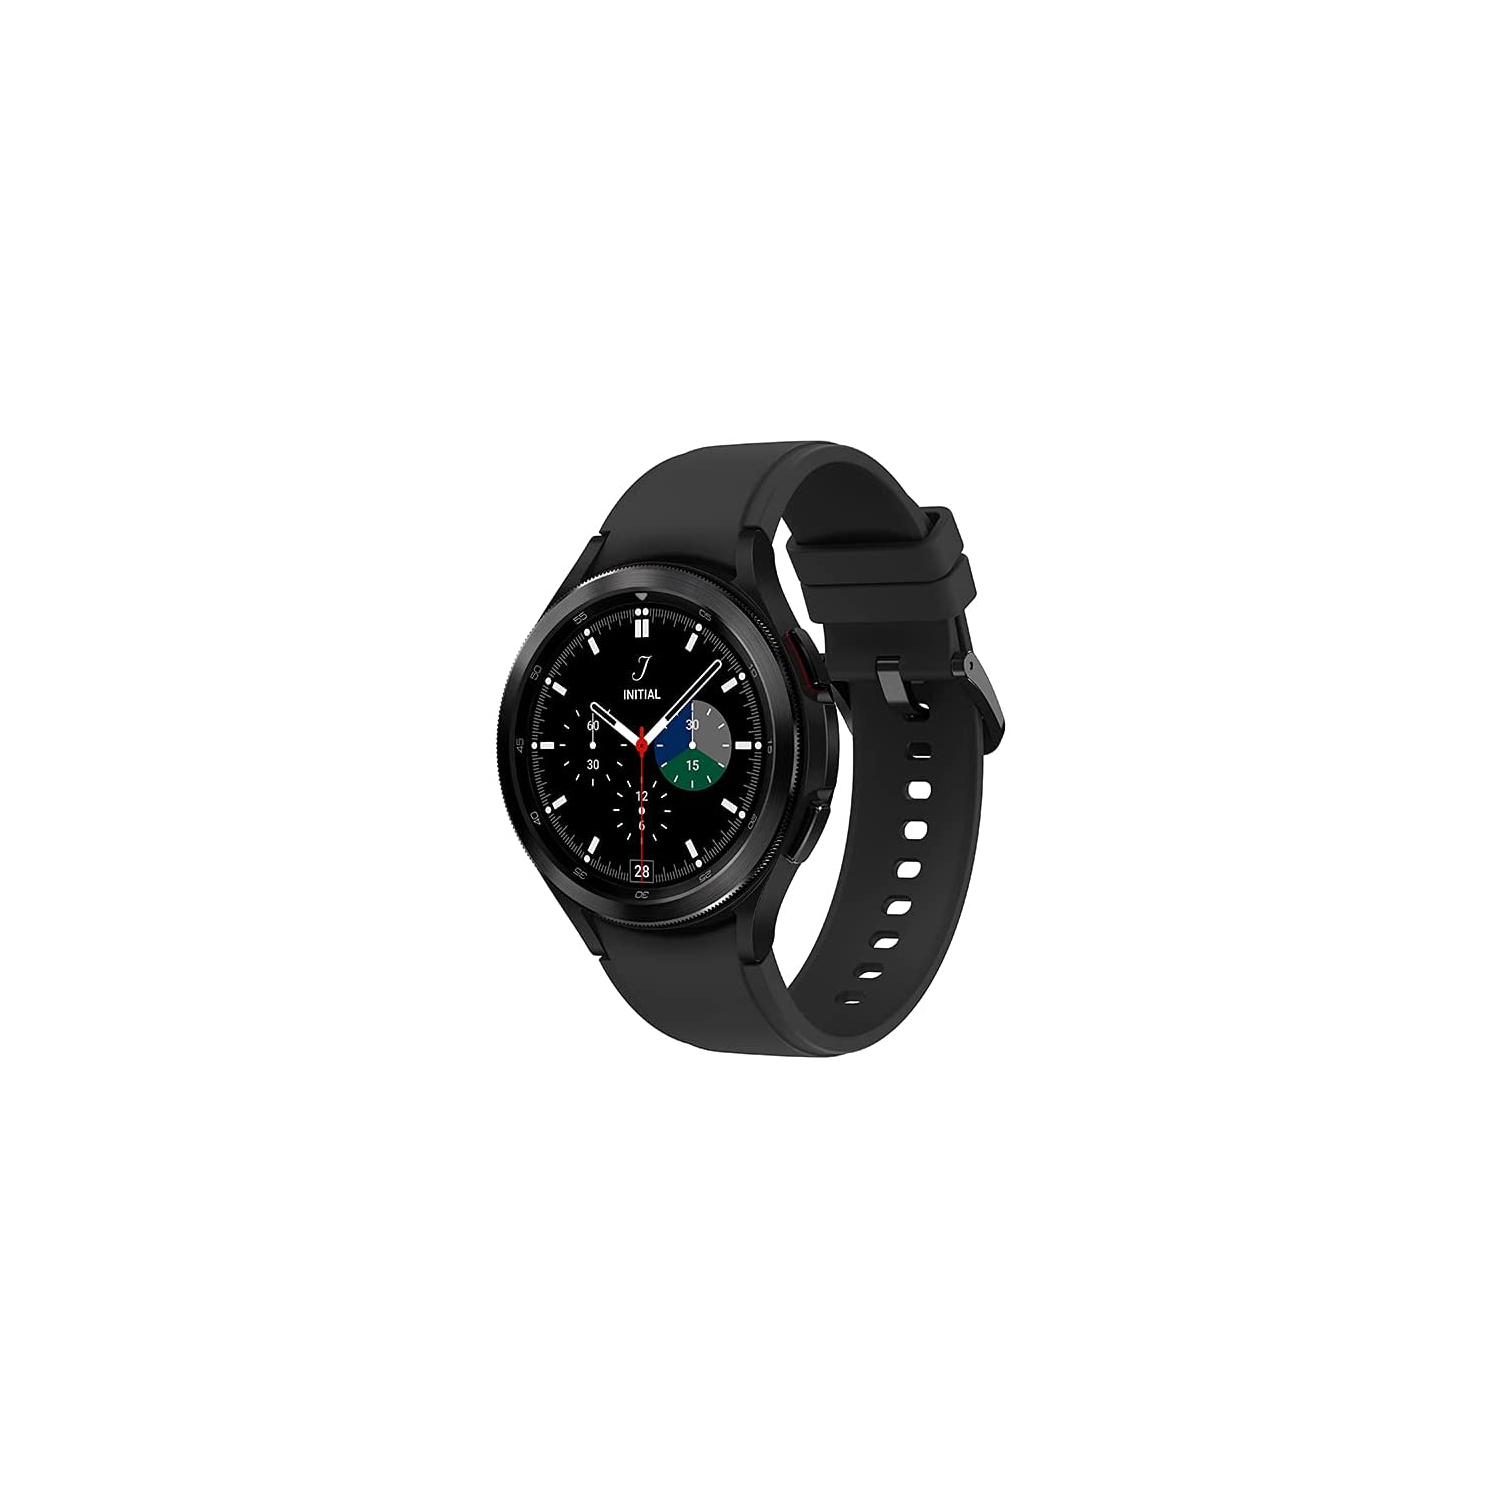 Samsung Galaxy Watch4 Classic| 46mm Black Stainless Steel| Google Wear OS, 1.36" Round Display, Rotating Bezel| HR Monitor, VO2 Max, Fitness Tracking, Sleep Management- Brand New| Bluetooth| WIFI| GPS